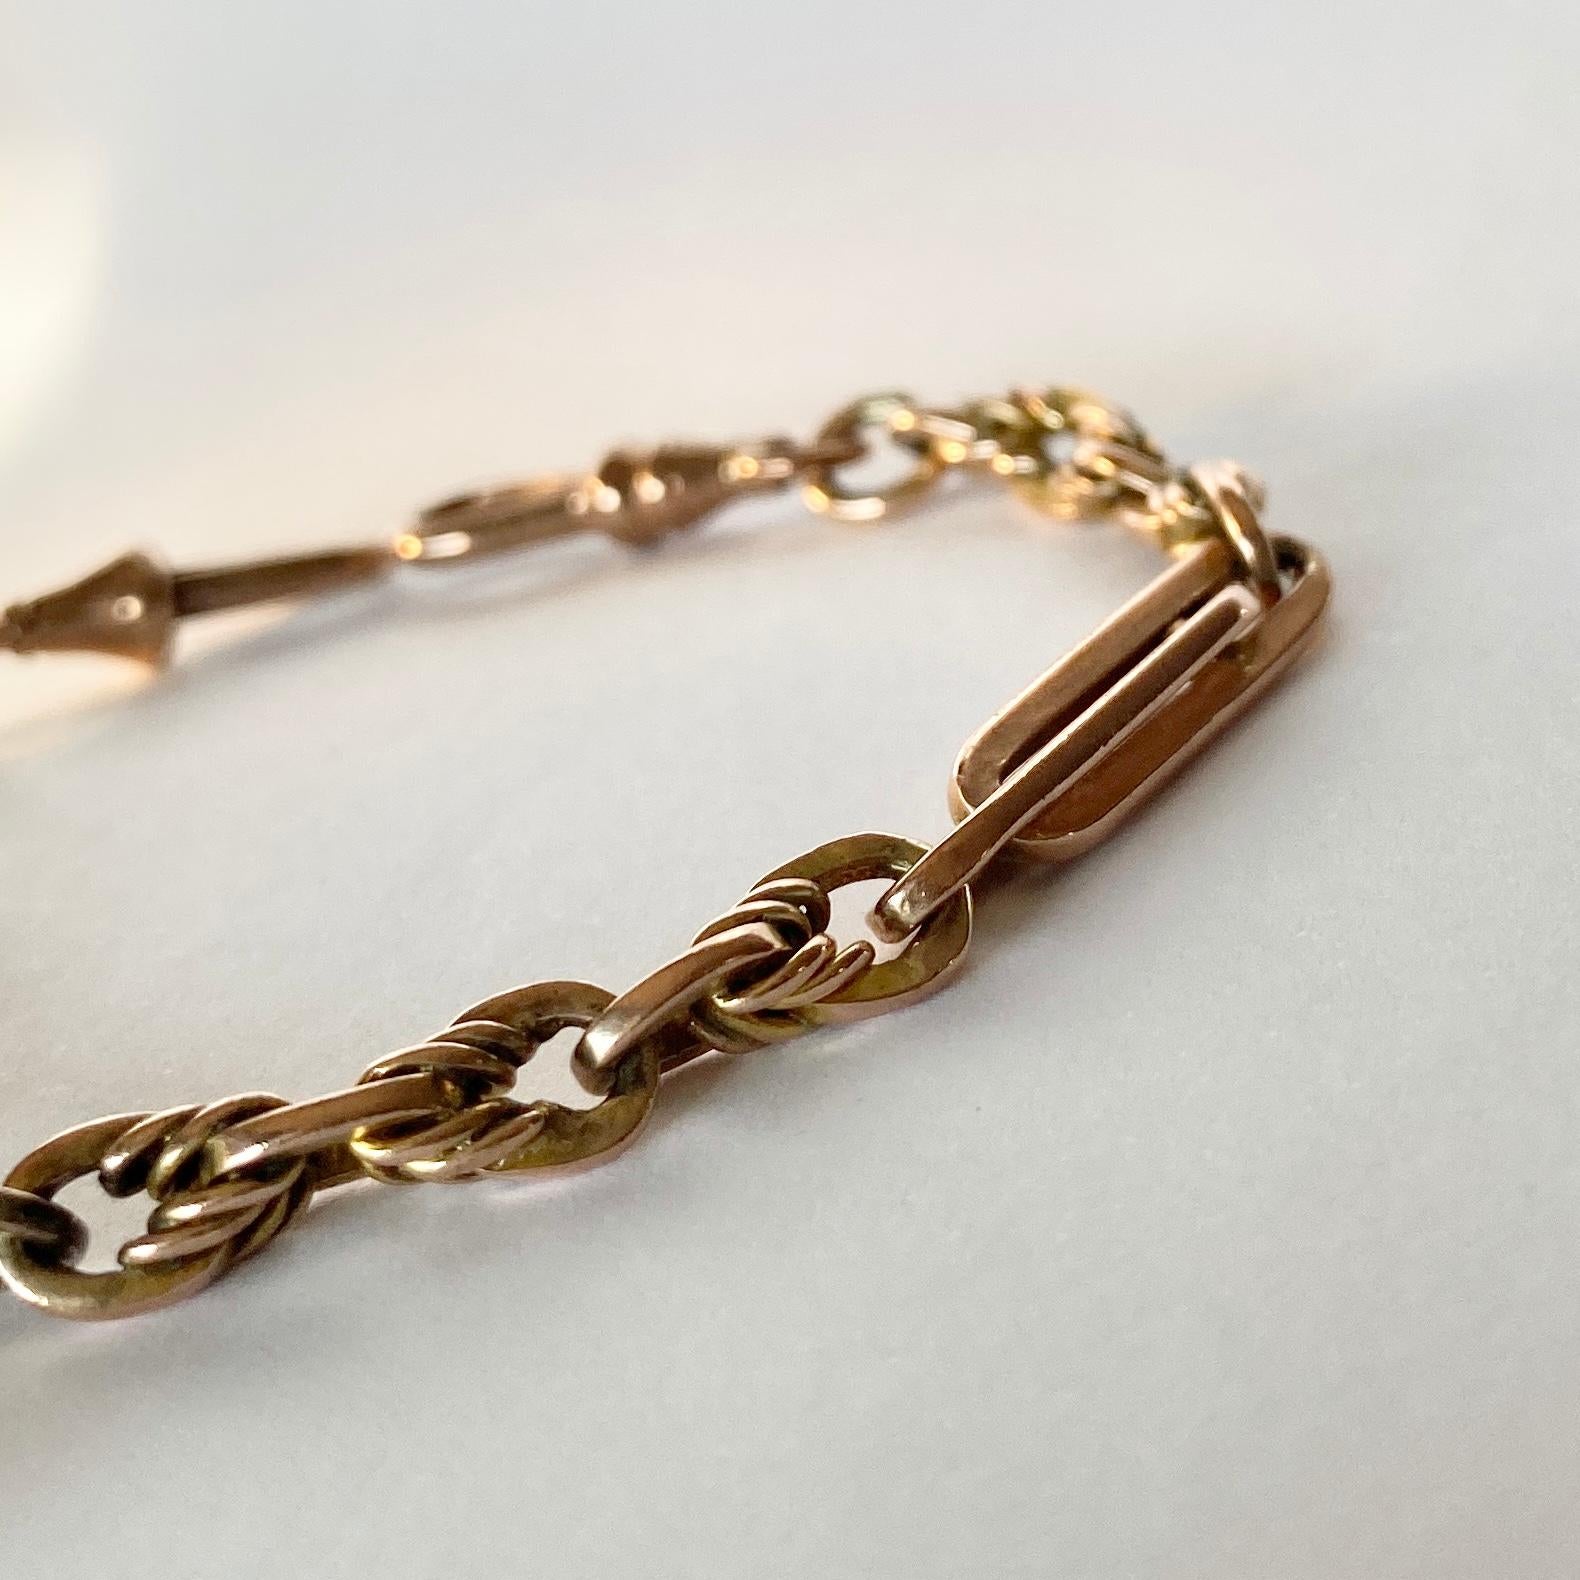 This gorgeous bracelet has highly decorative links in it. One of the styles resembles the trombone link and the other is layered, knotted and twisted. This bracelet also holds a t-bar. Modelled in 9ct gold.

Length: 19cm 
Width: 5.5mm 

Weight: 17g